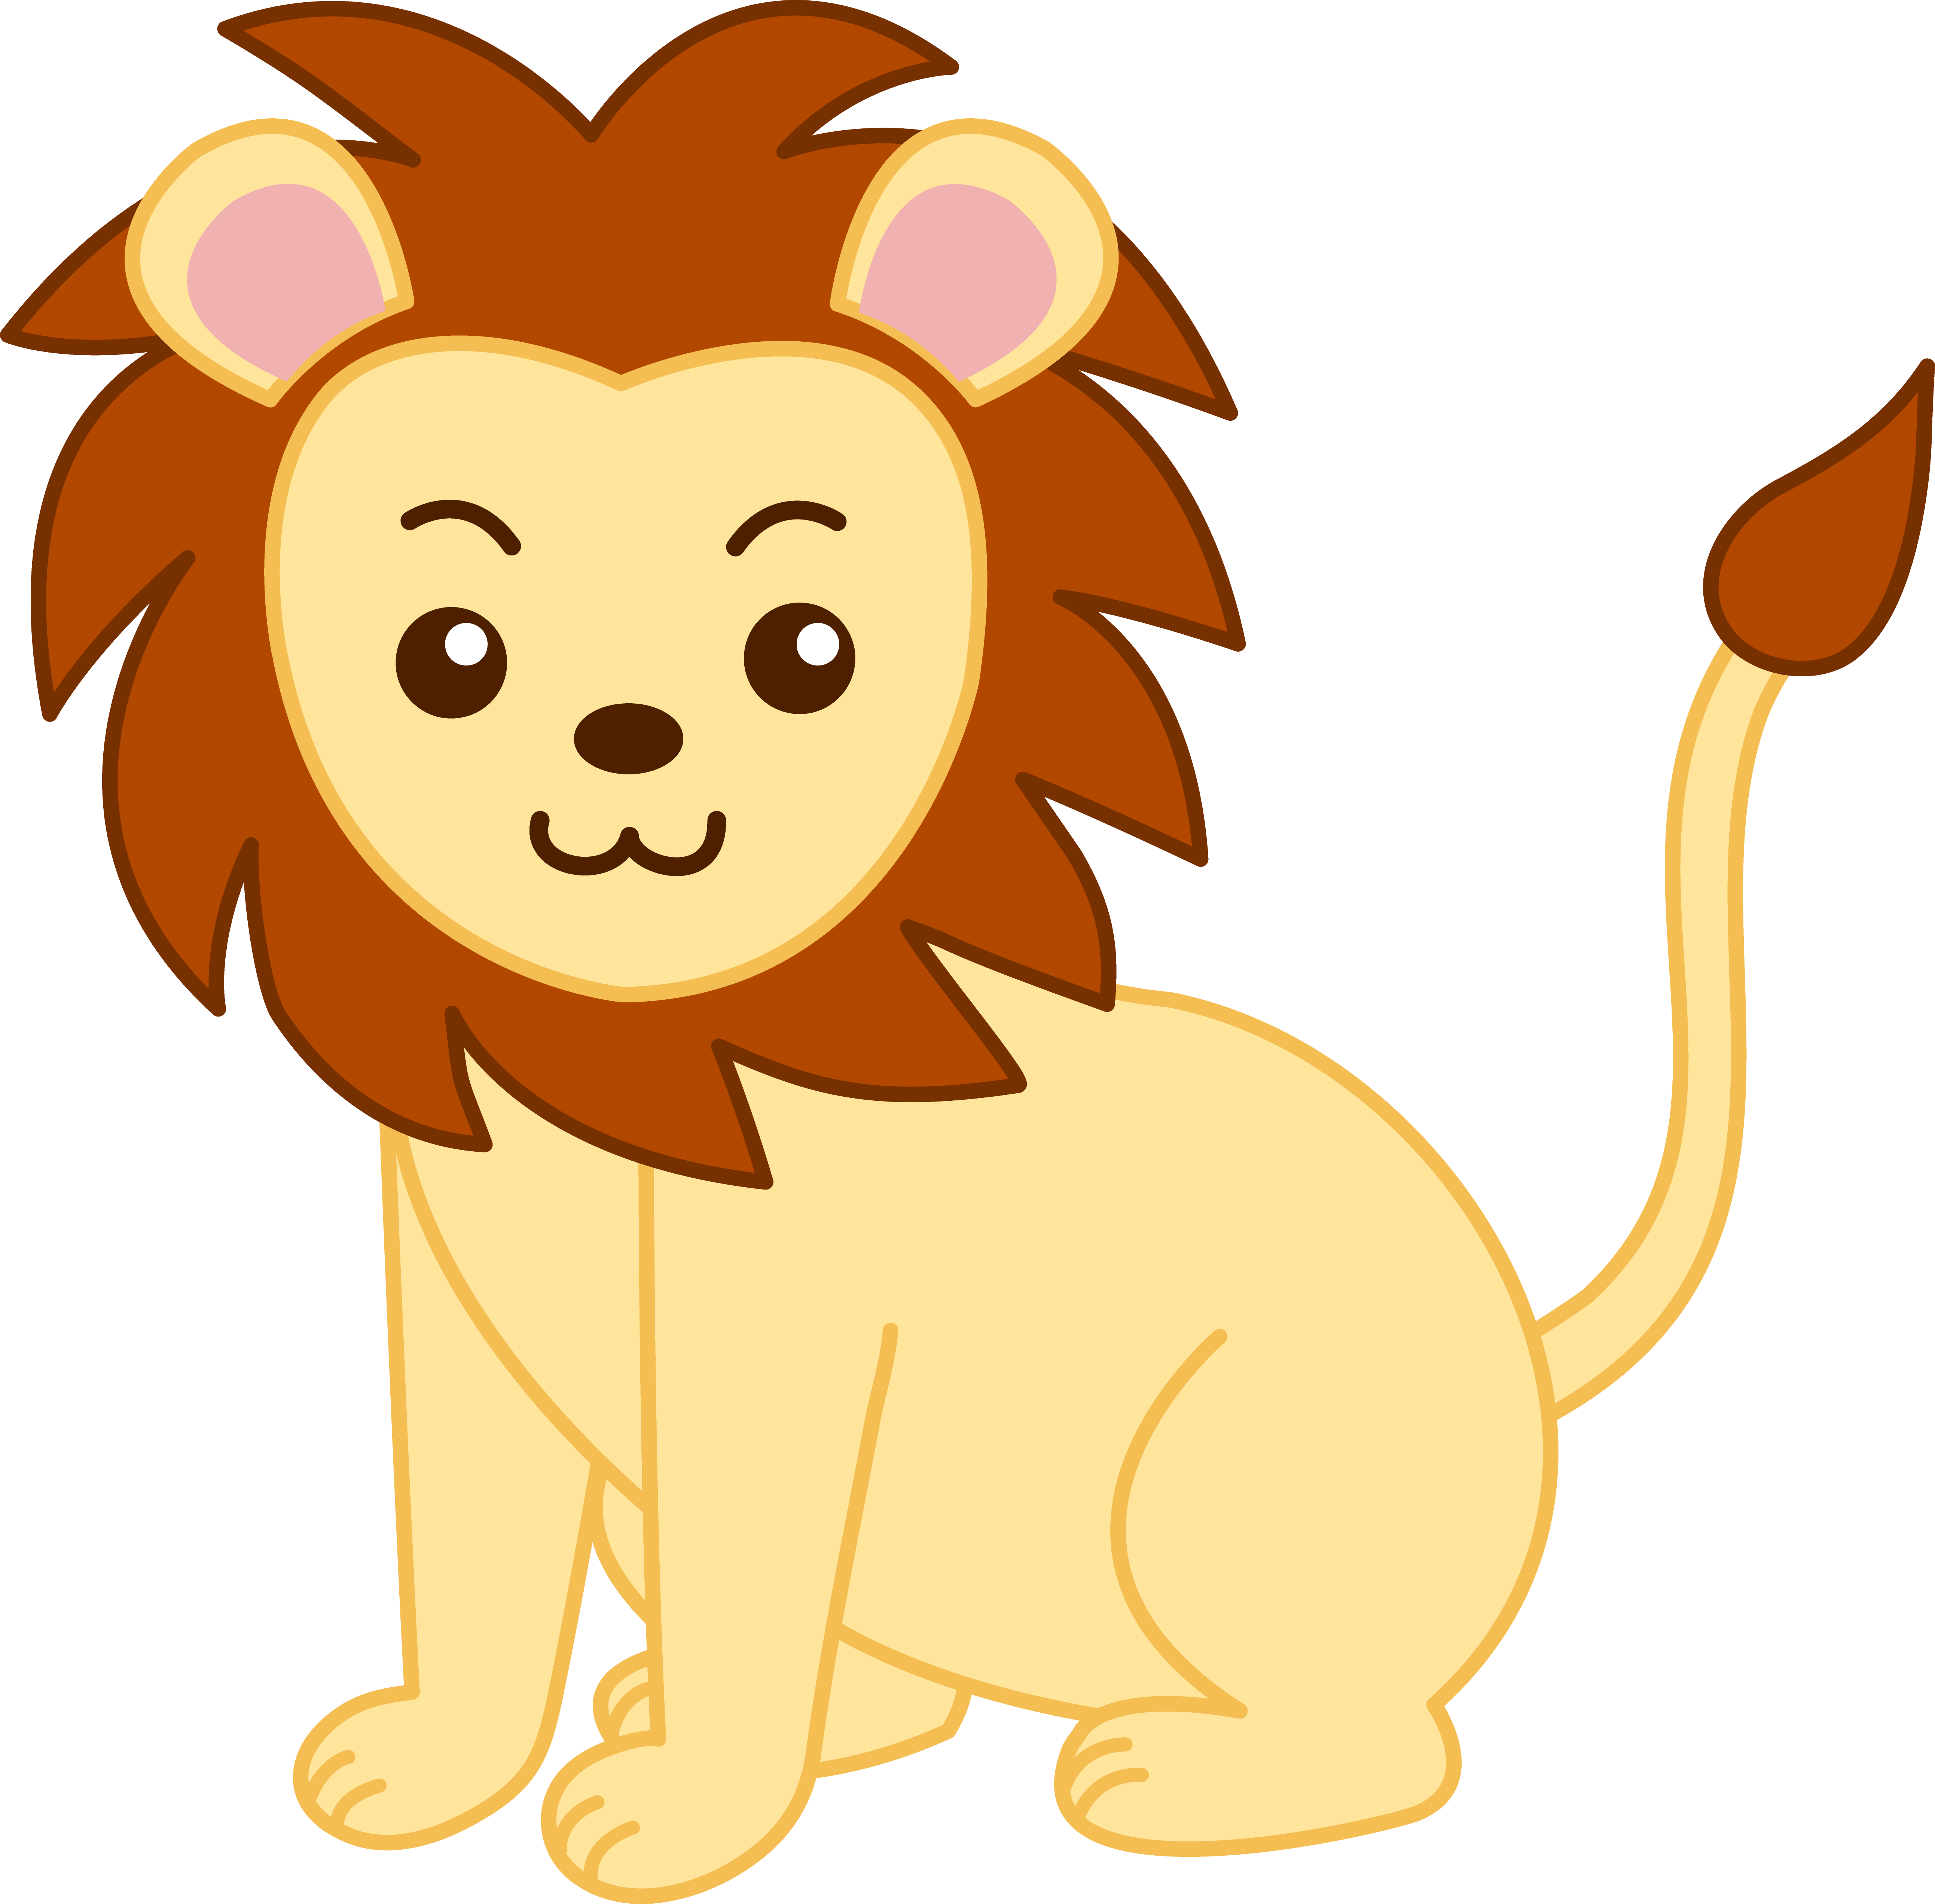 Cartoon Pictures Of Lions | Free Download Clip Art | Free Clip Art ...